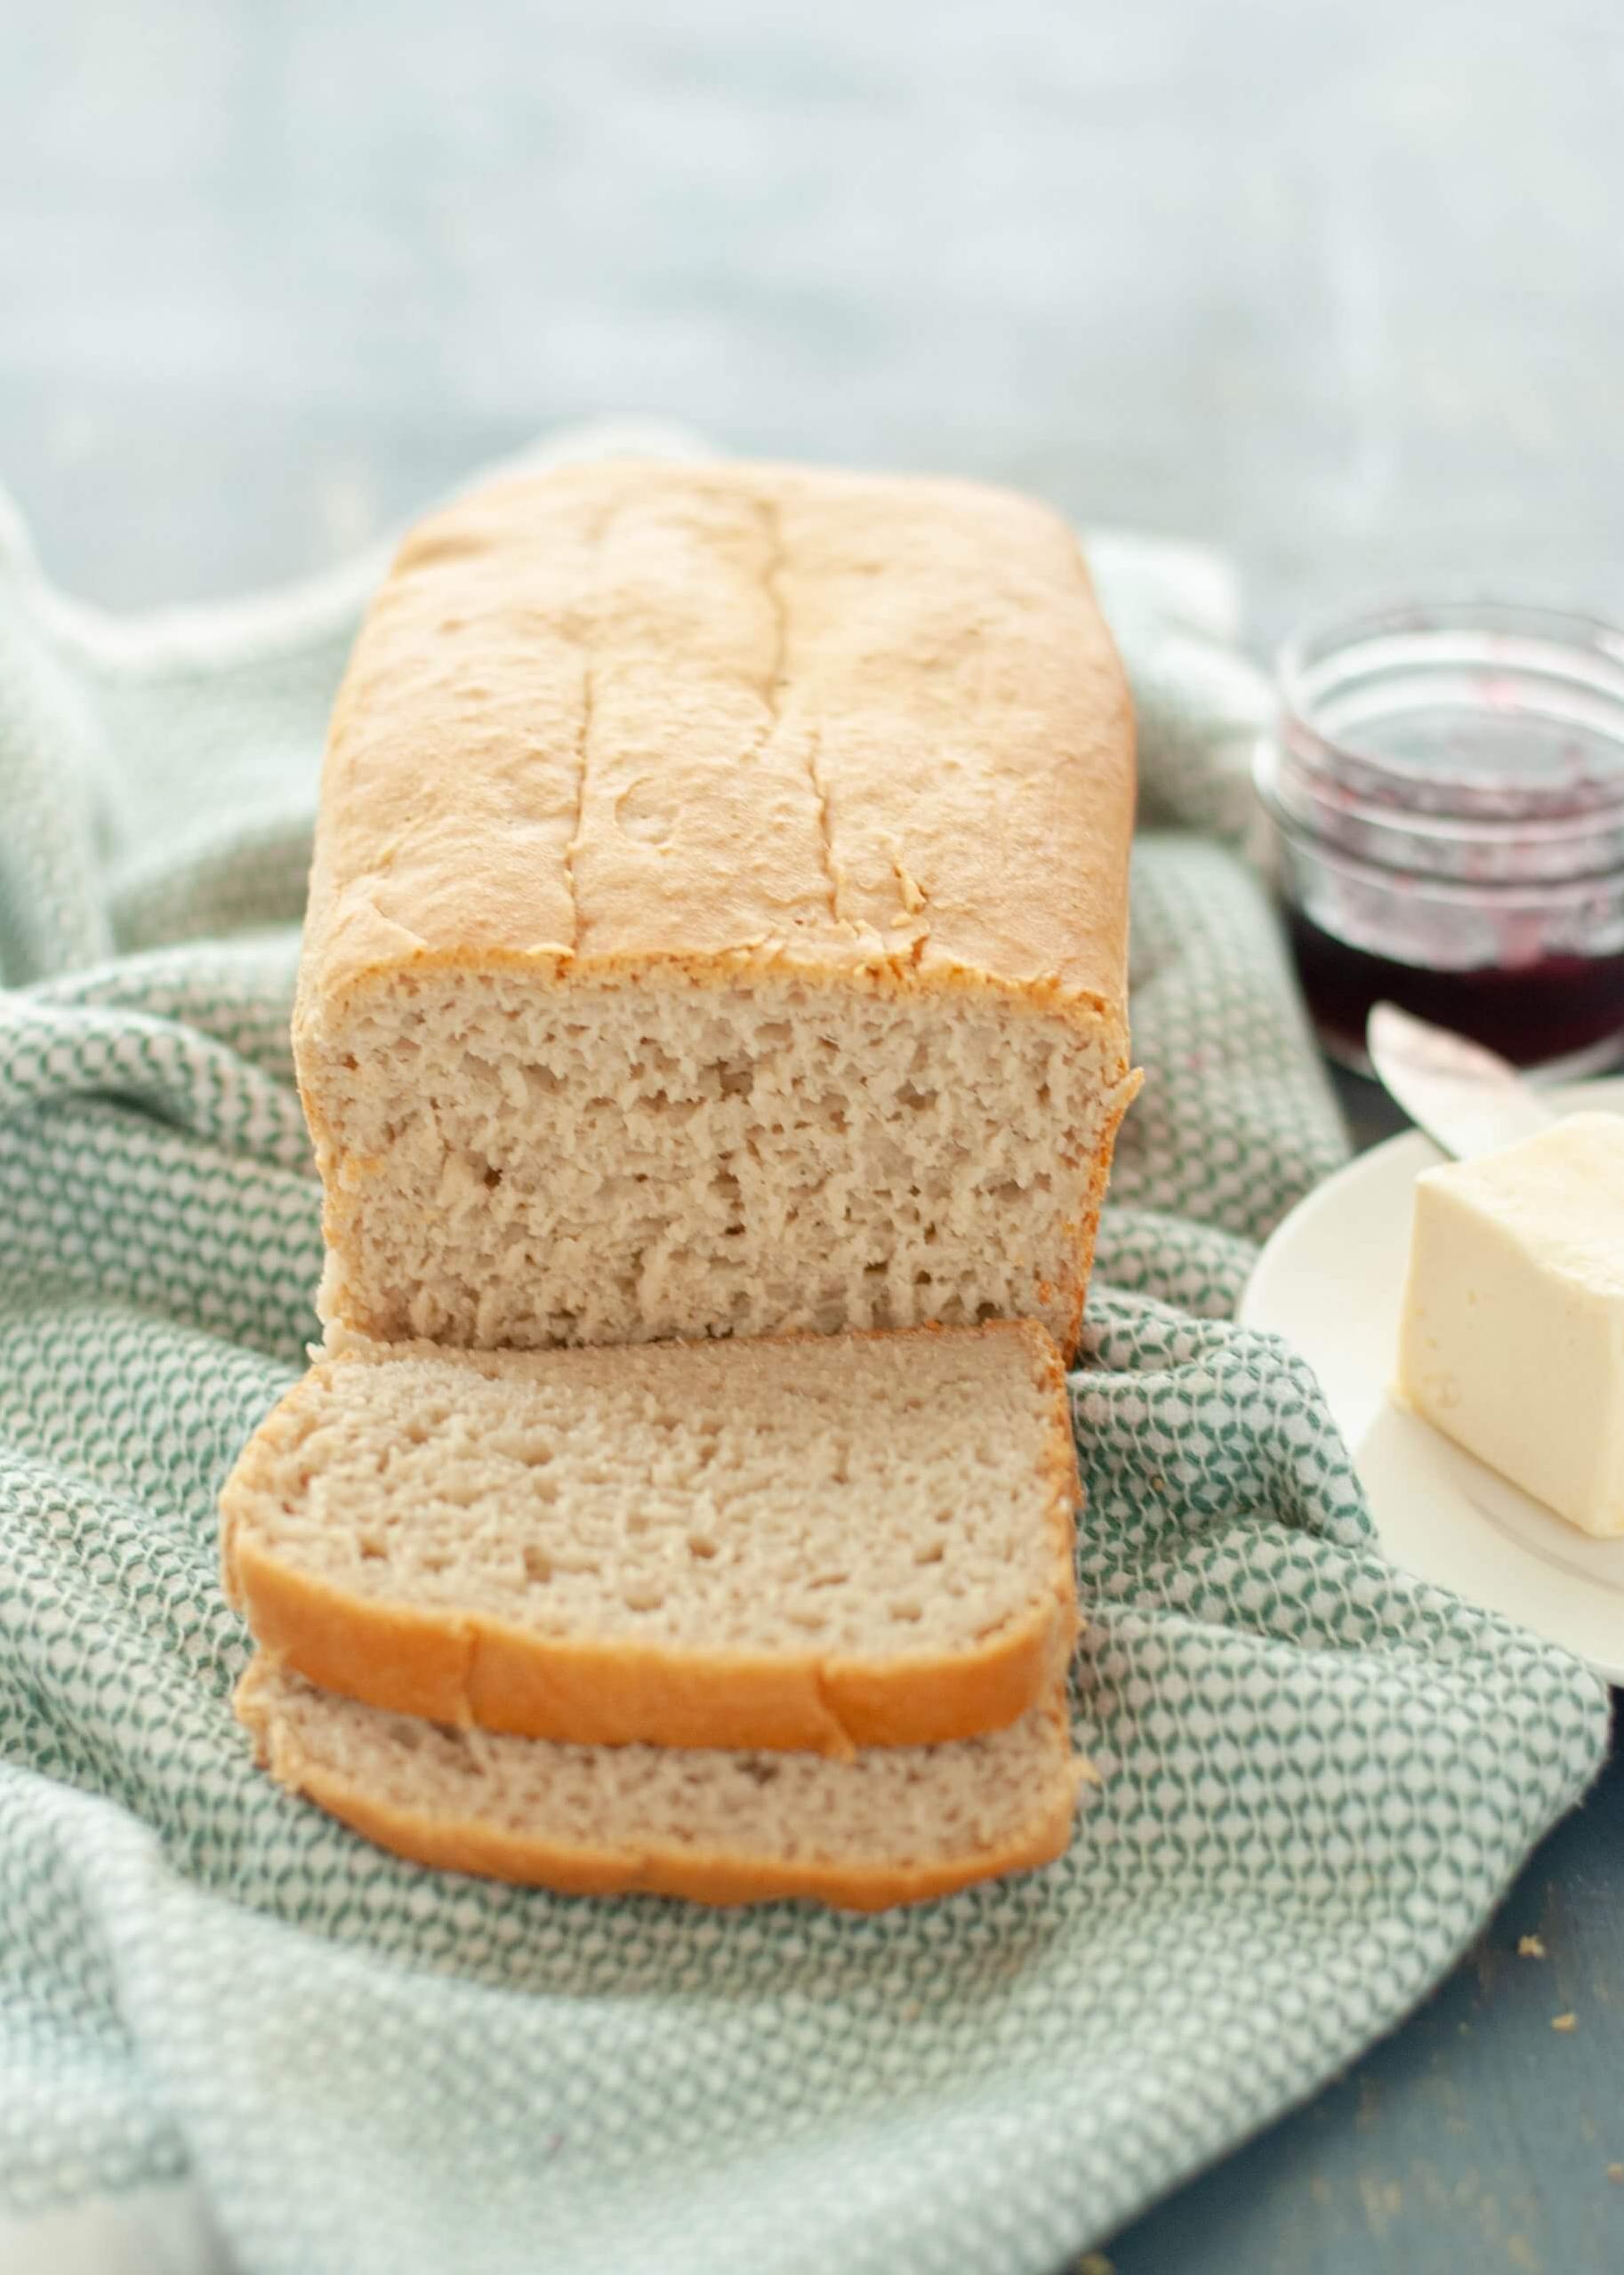  Who says bread can't be allergen-free and delicious?